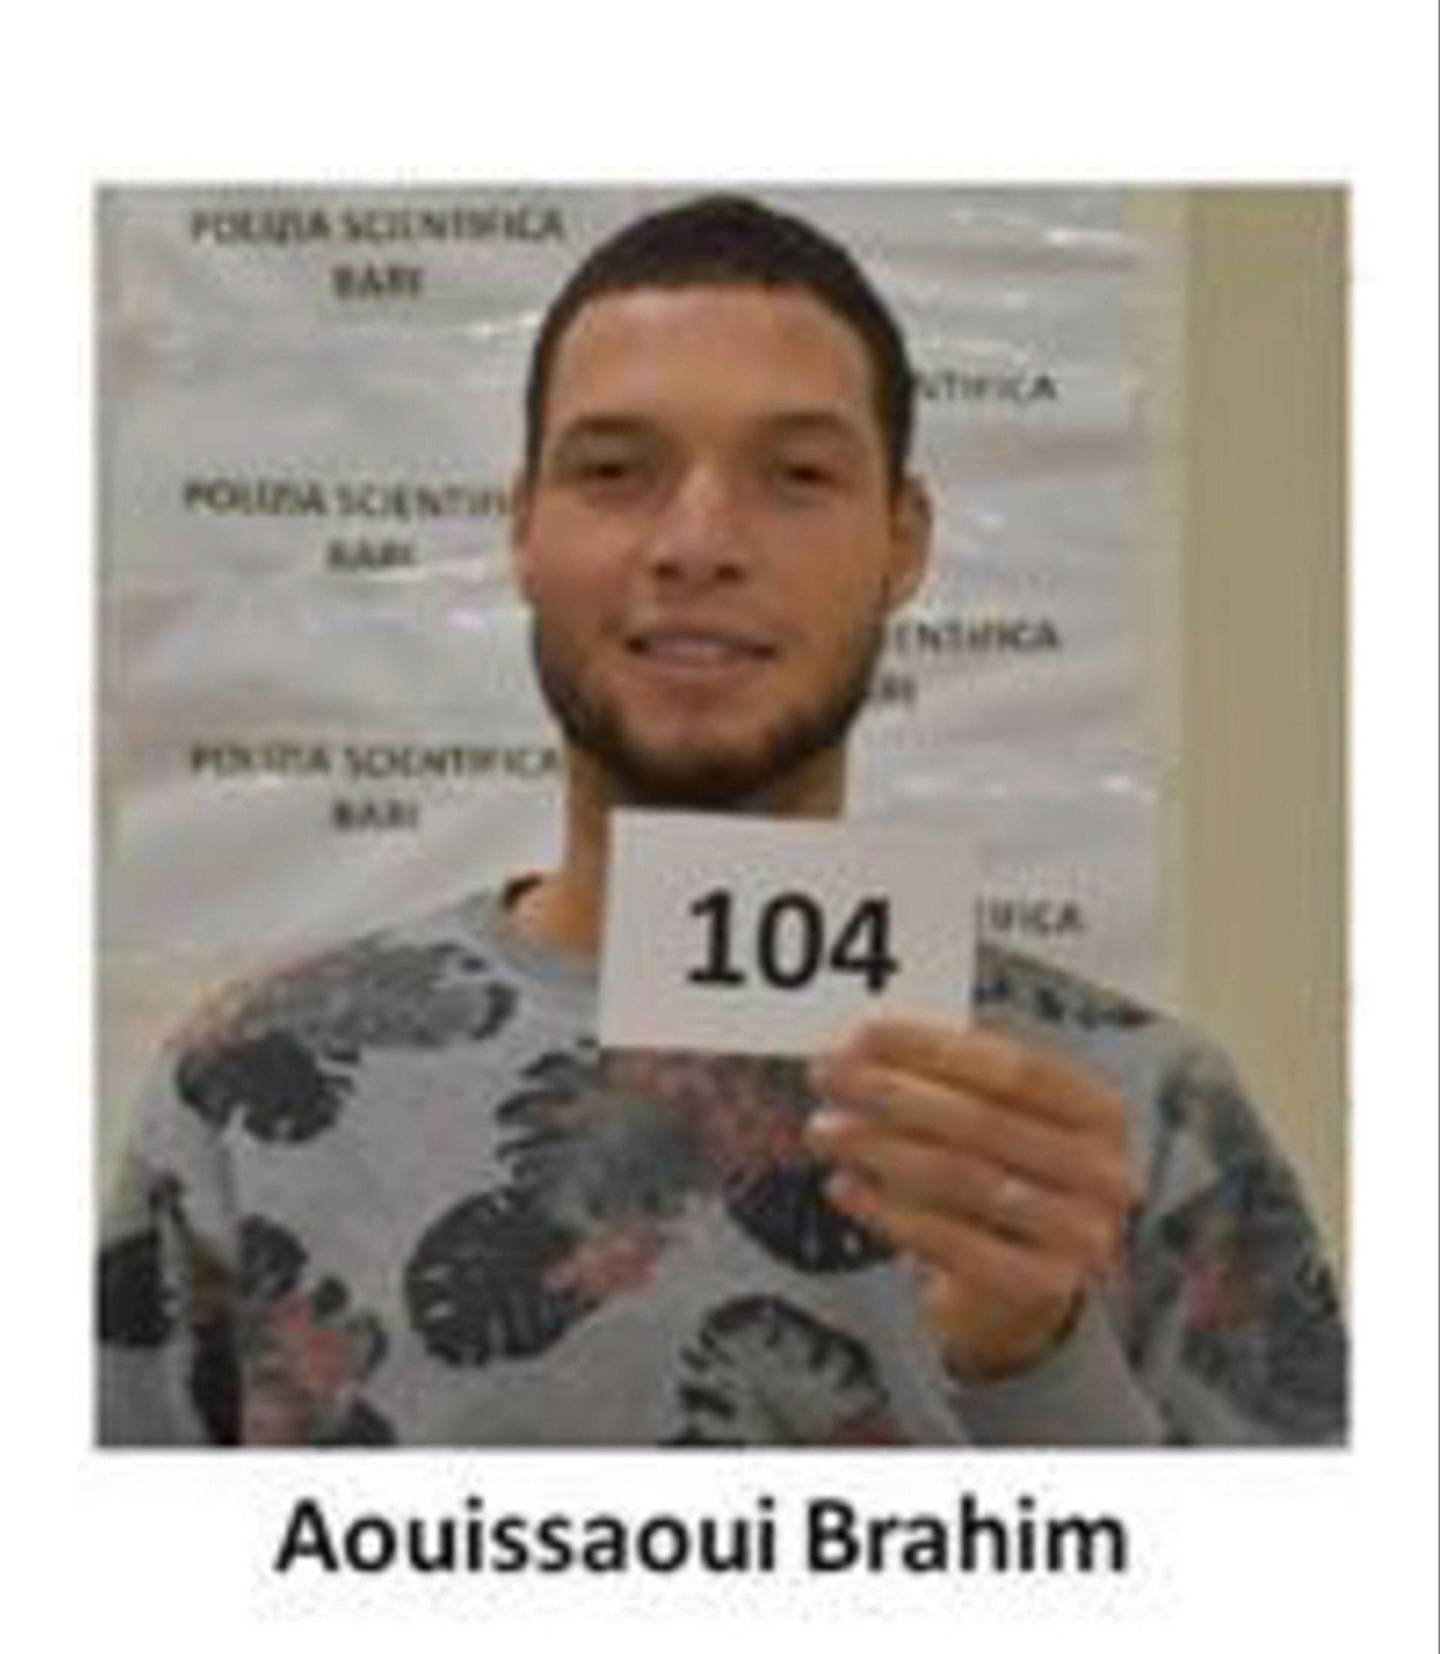 epa08785544 An undated photograph shows Tunisian citizen Brahim Aouissaoui, at an undisclosed location, issued 30 October 2020. Brahim Aouissaoui was named as suspected terrorist in a knife attack that left three people dead in Nice, France, on 29 October. The attack comes less than a month after the beheading of a French middle school teacher in Paris on 16 October.  EPA/STR BEST QUALITY AVAILABLE